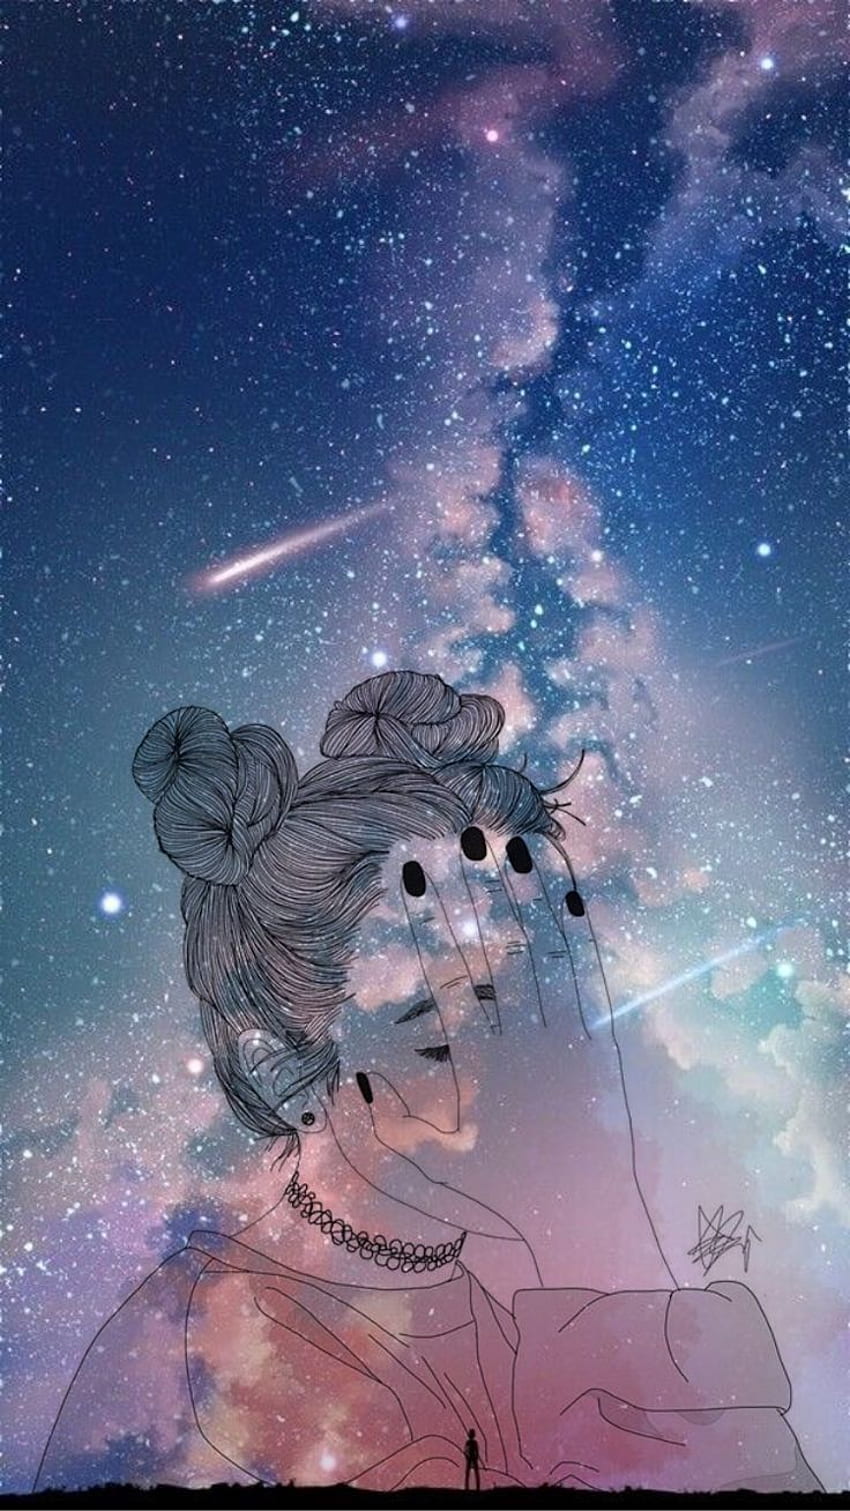 He has created it all Stars above, next to the moon, only God can control.  Fondos de pantalla femeninos, Fondos de pantalla tumblr, iPhone fondos de  pantalla, Black Moon and Stars HD